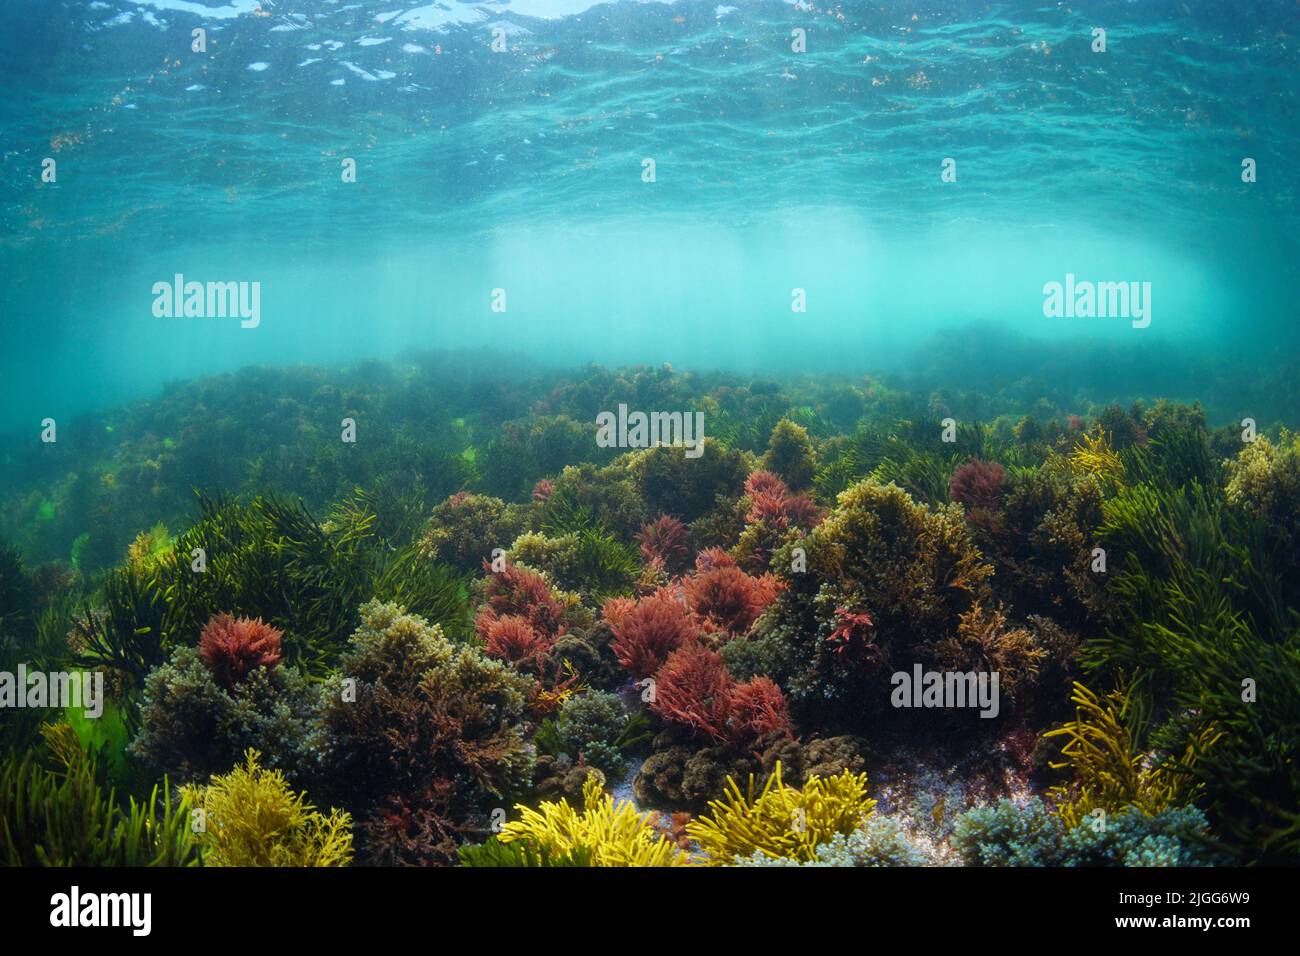 Natural underwater seascape in the Atlantic ocean with colorful algae below water surface, Spain, Galicia Stock Photo